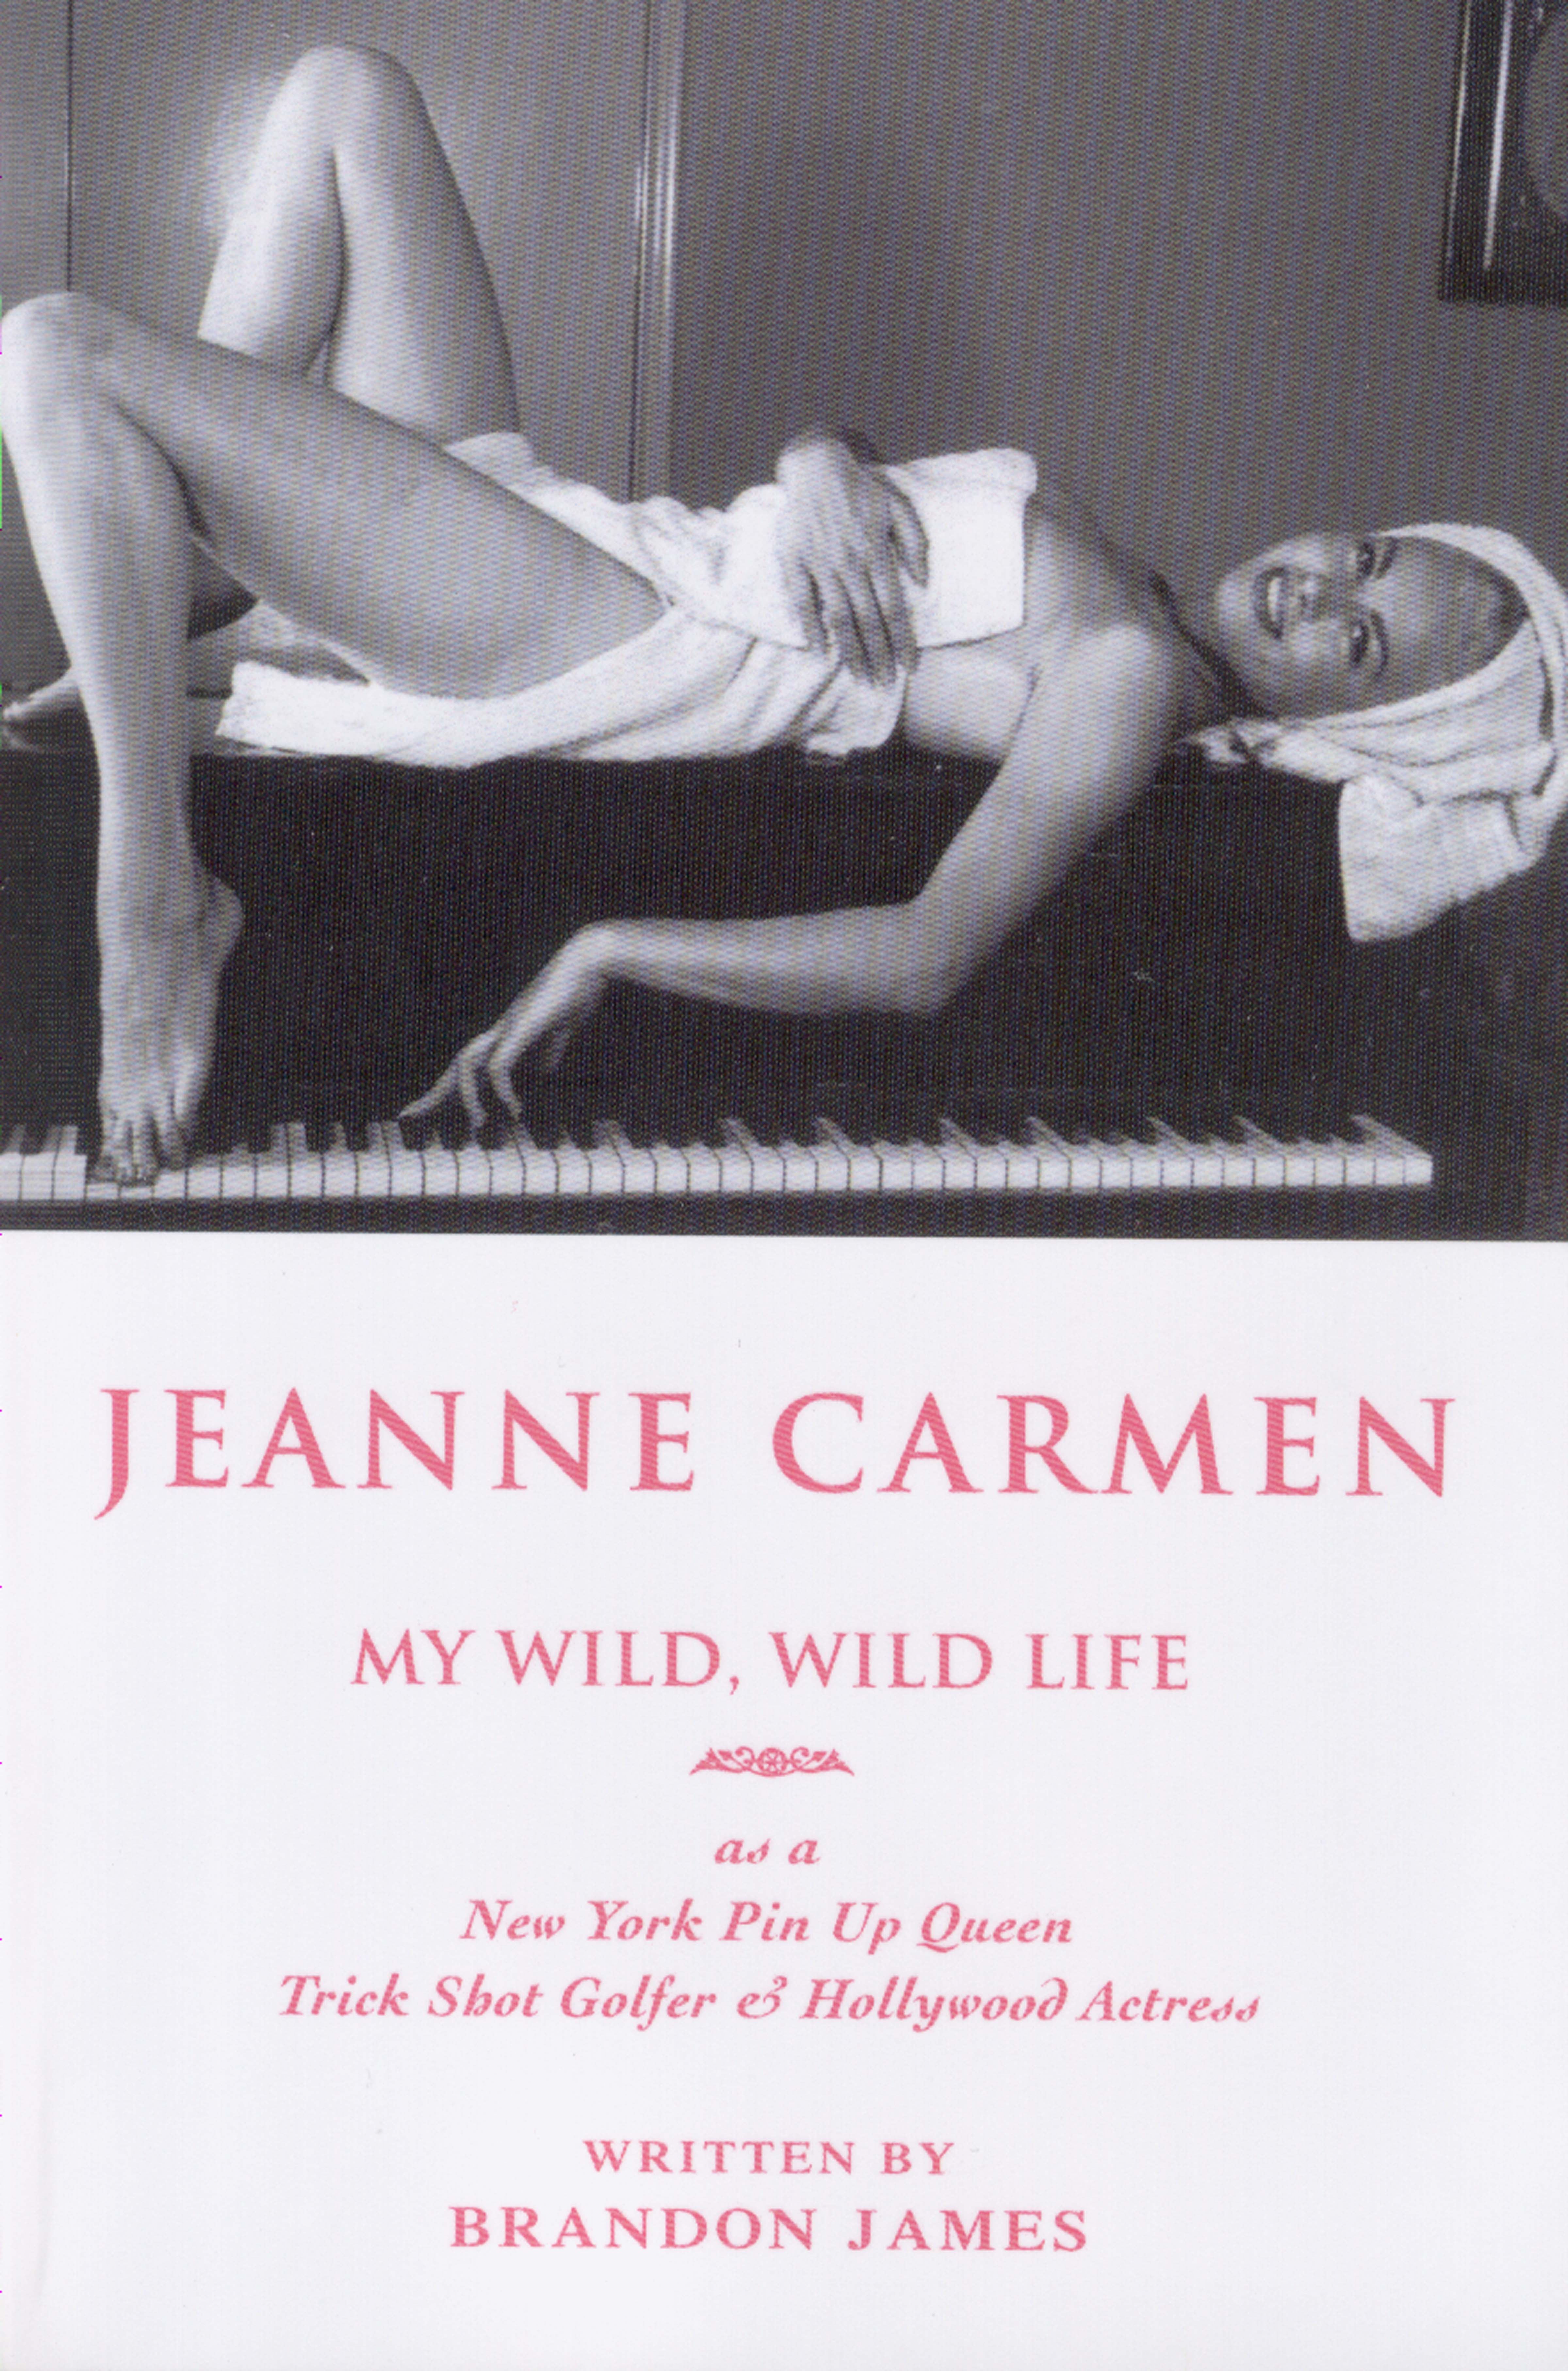 JEANNE CARMEN: MY WILD, WILD LIFE As A NY Pin Up Queen, Trick Shot Golfer & Hollywood Actress [Book Cover]